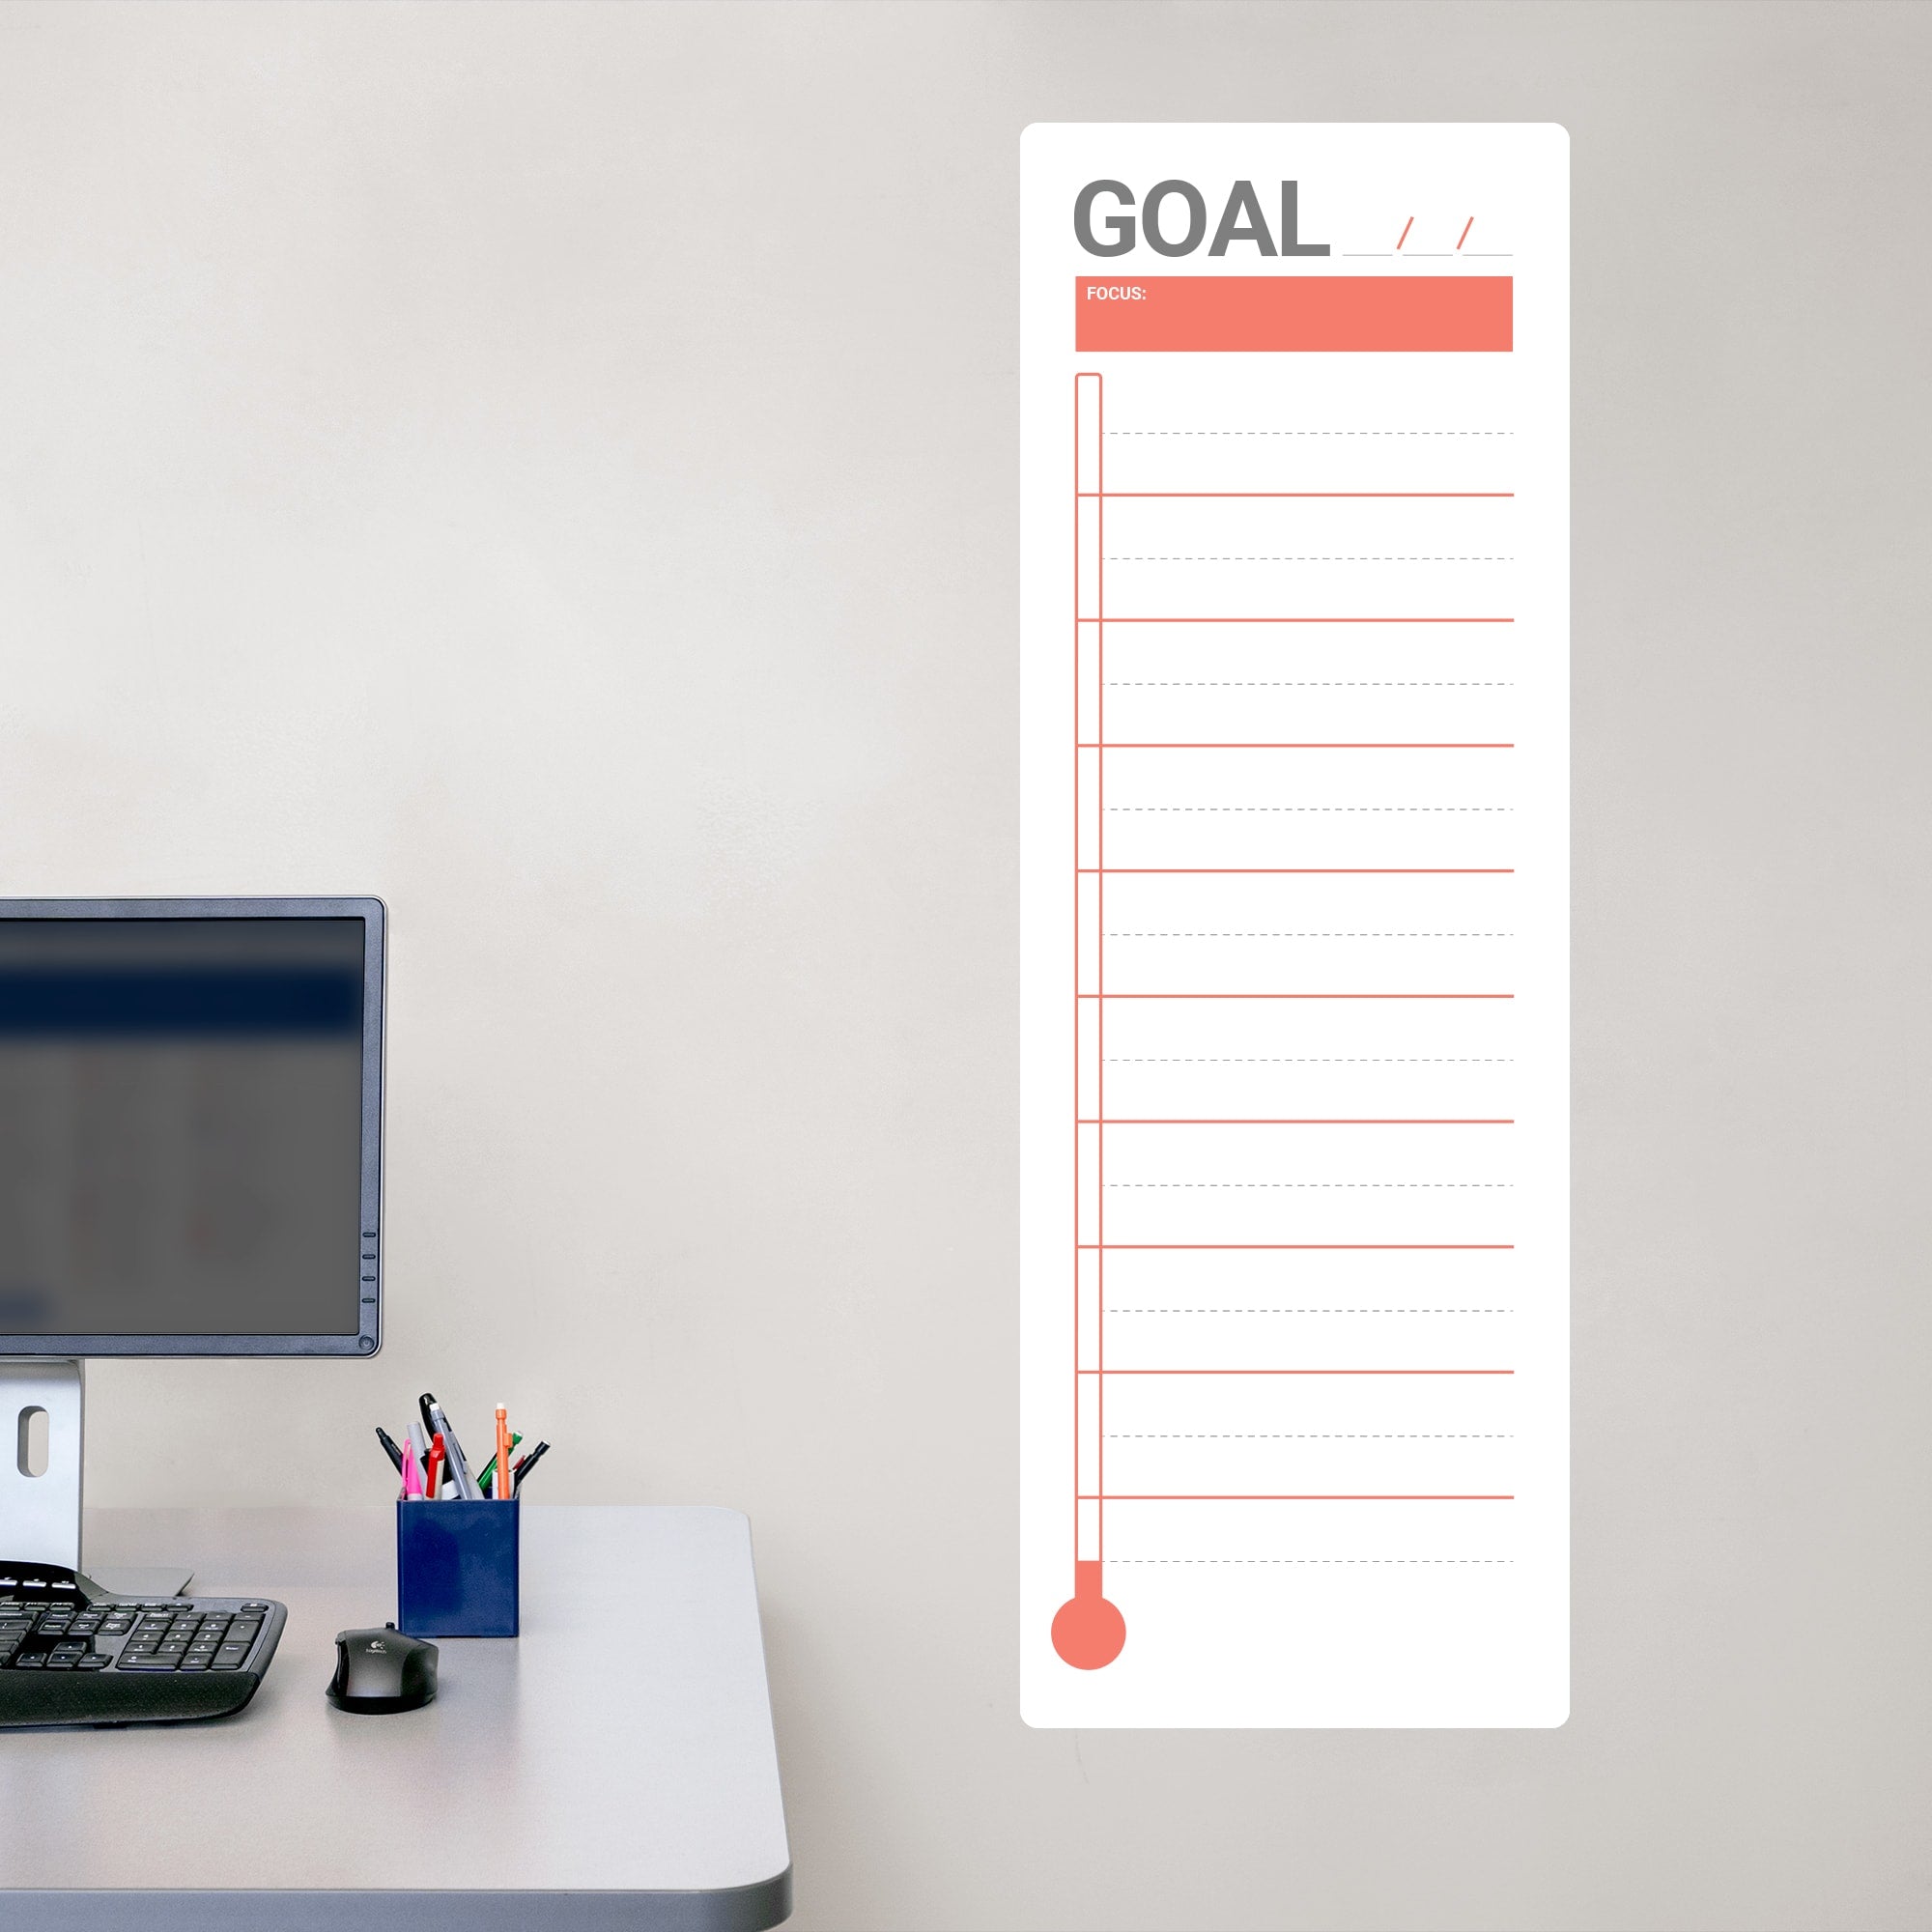 Goal Thermometer: Minamalist Design - Removable Dry Erase Vinyl Decal in Red (42"W x 14"H) by Fathead